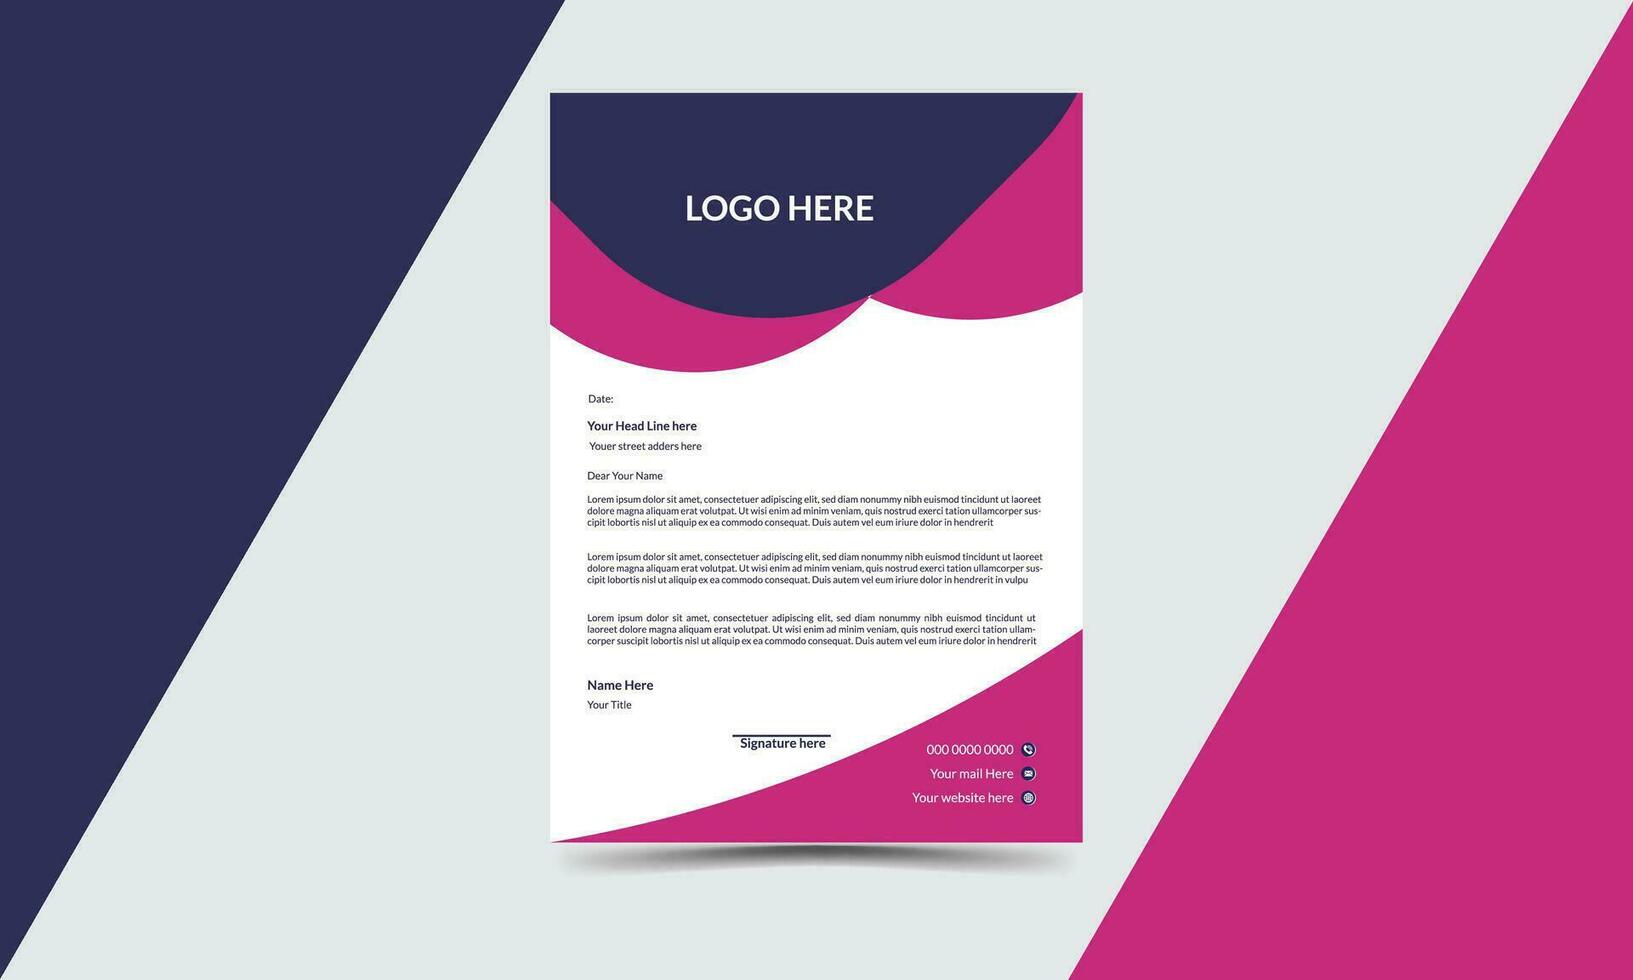 corporate modern business letterhead design template with yellow, blue and red color. creative modern letterhead design template for your project. letter head, letterhead, business letterhead design vector